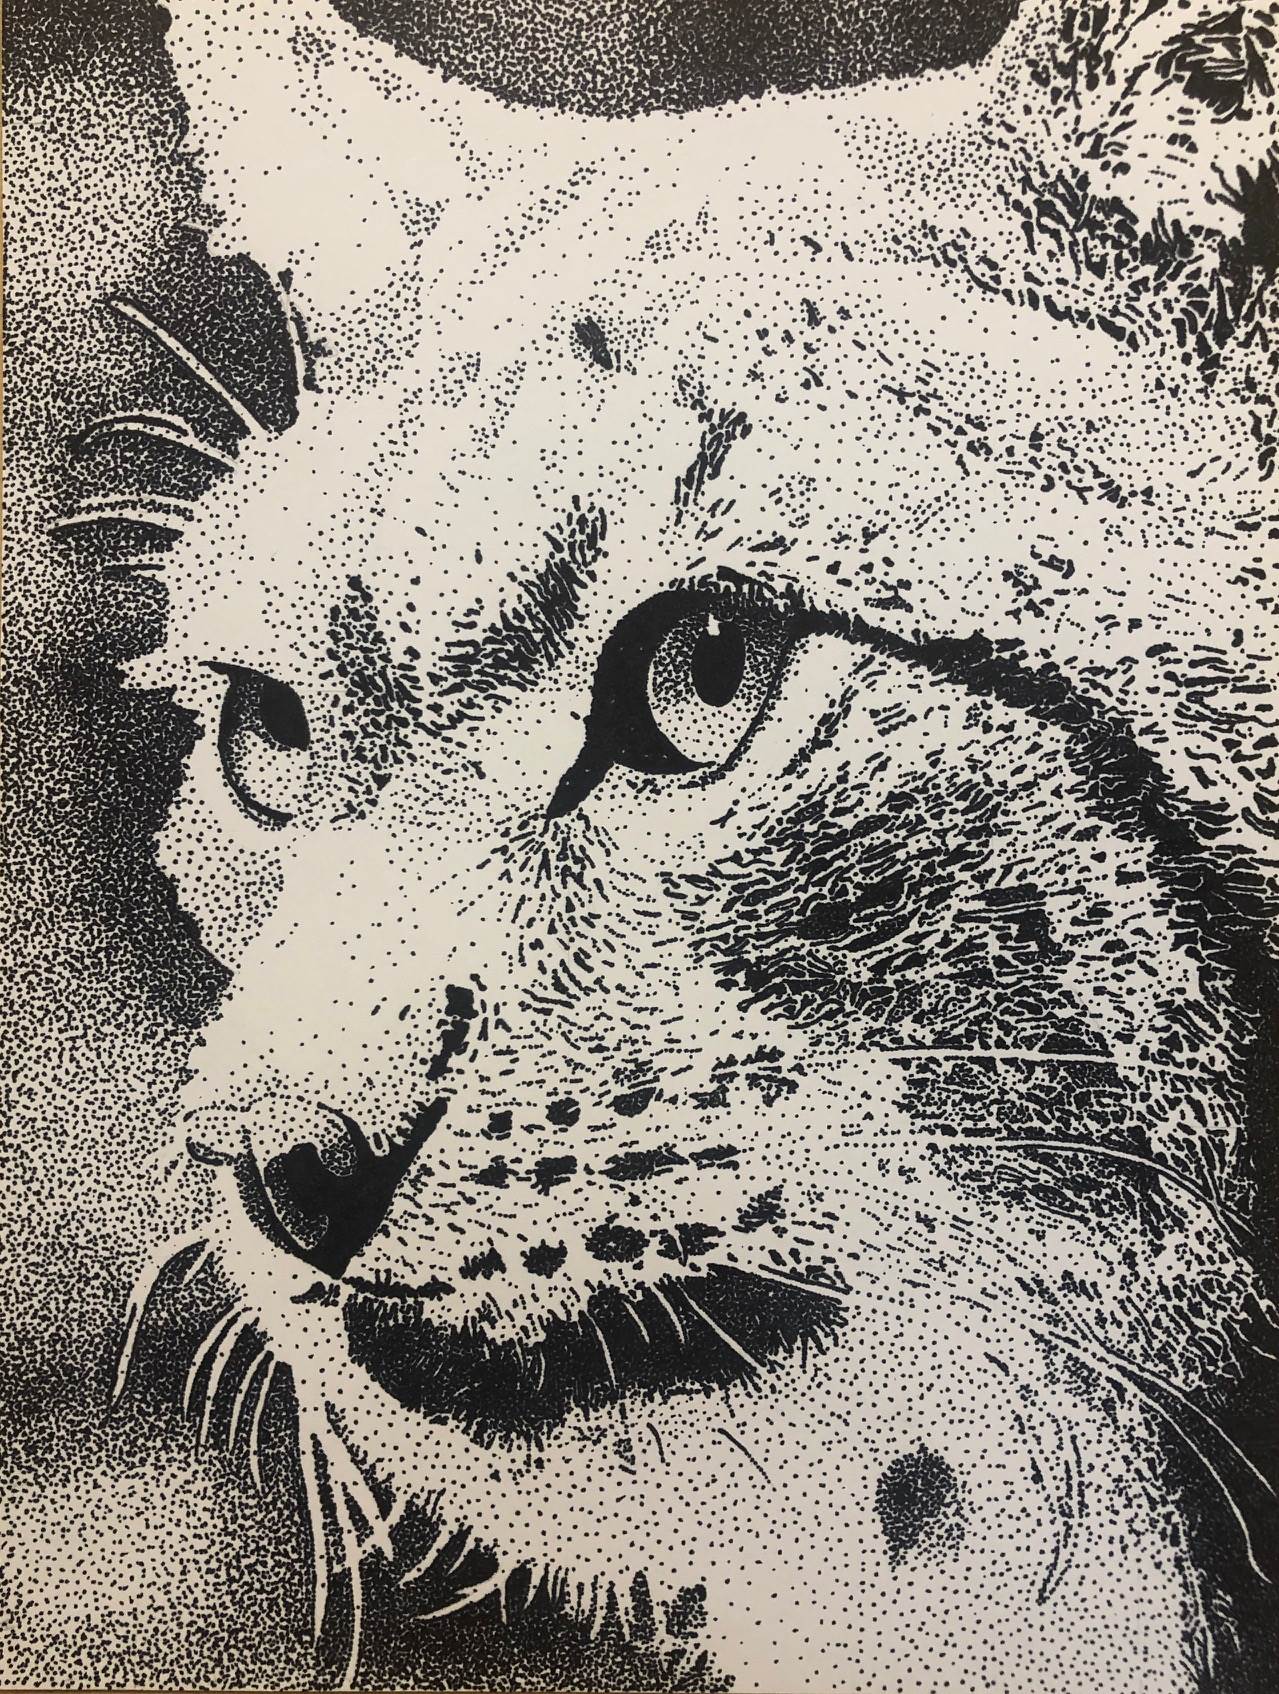 Cat's face hand drawn